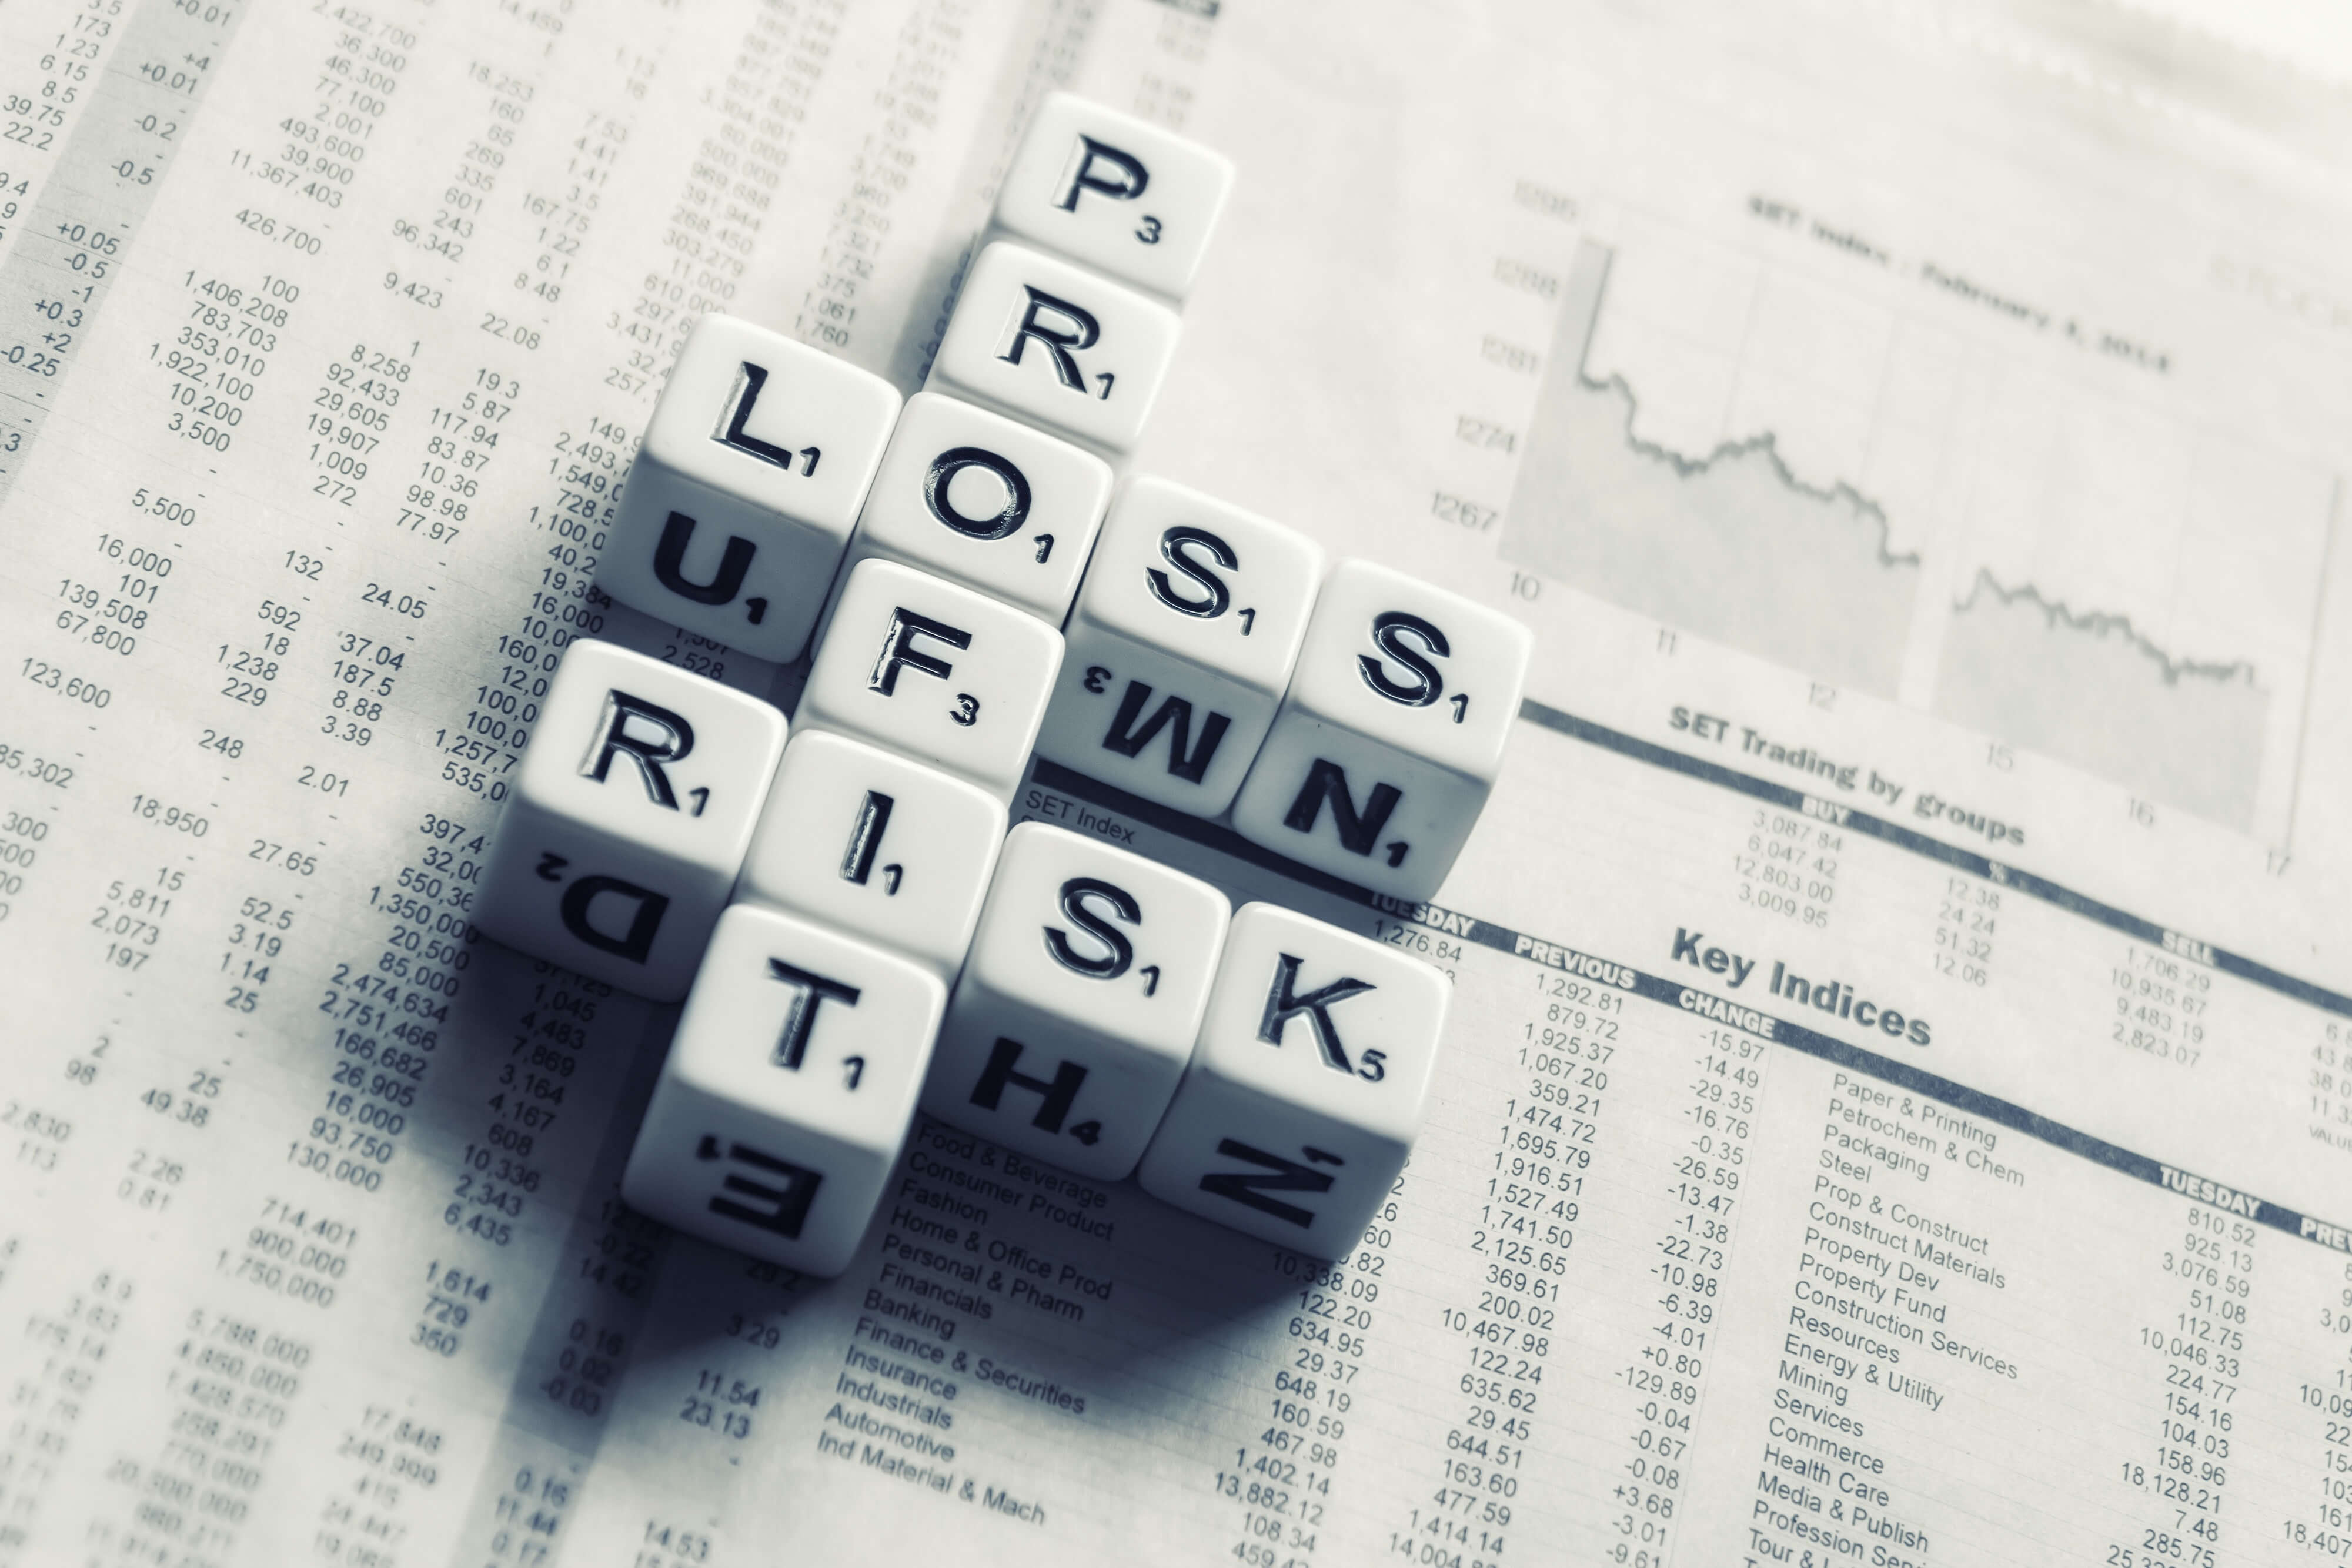 Risk profiling is important before investing